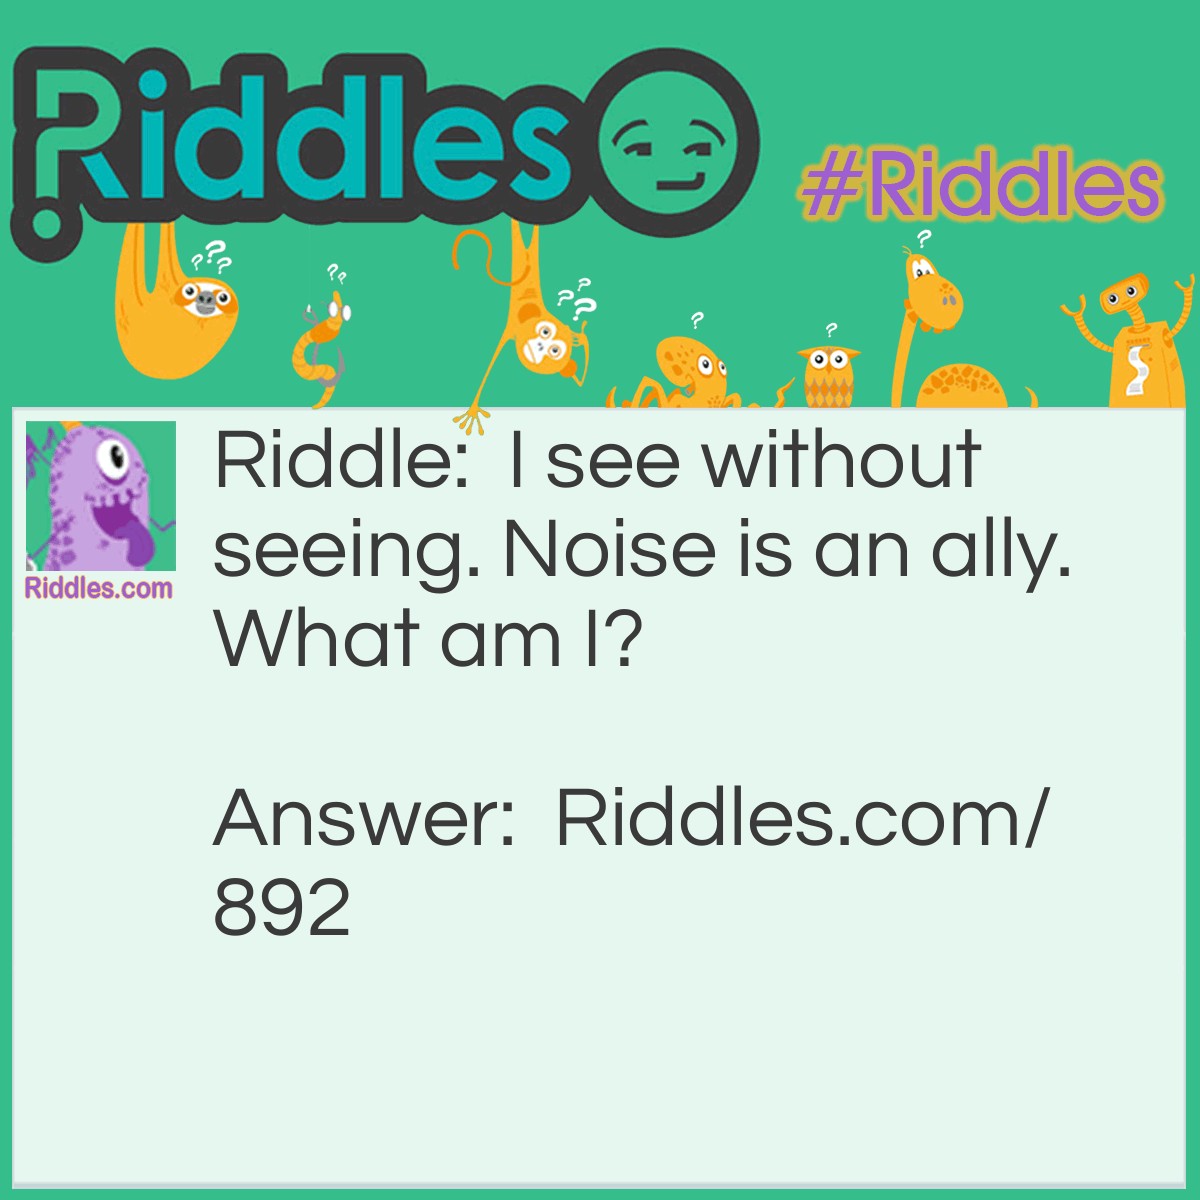 Riddle: I see without seeing. Noise is an ally. 
What am I? Answer: A bat.